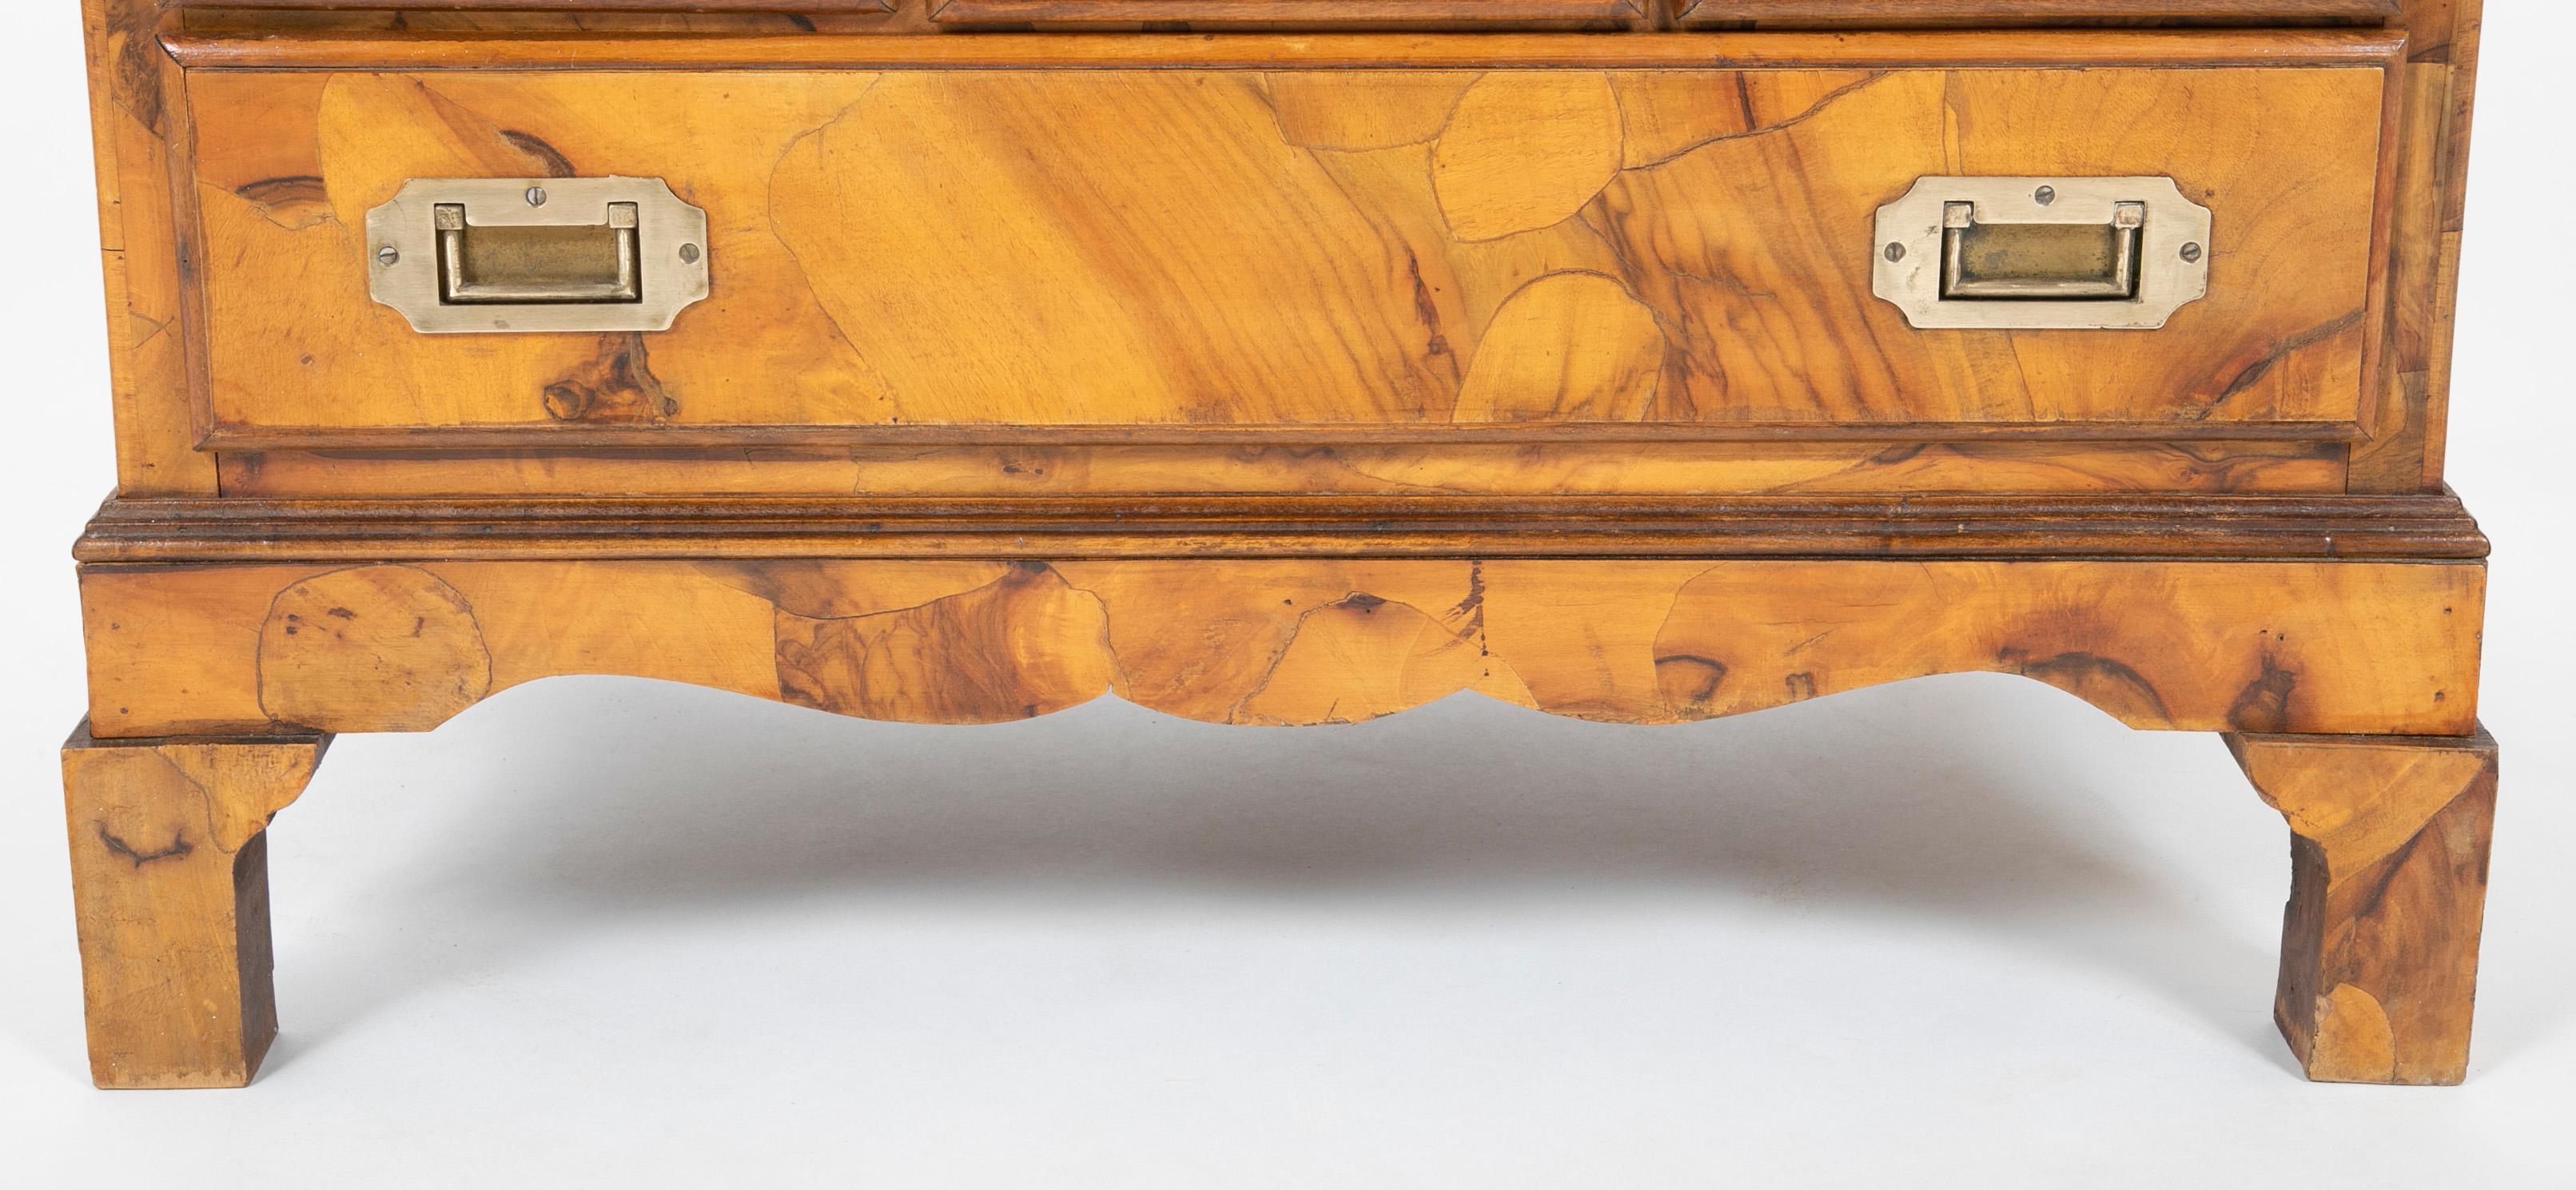 Italian Campaign Chest of Drawers with Olive Wood Veneer, Mid-20th Century For Sale 8